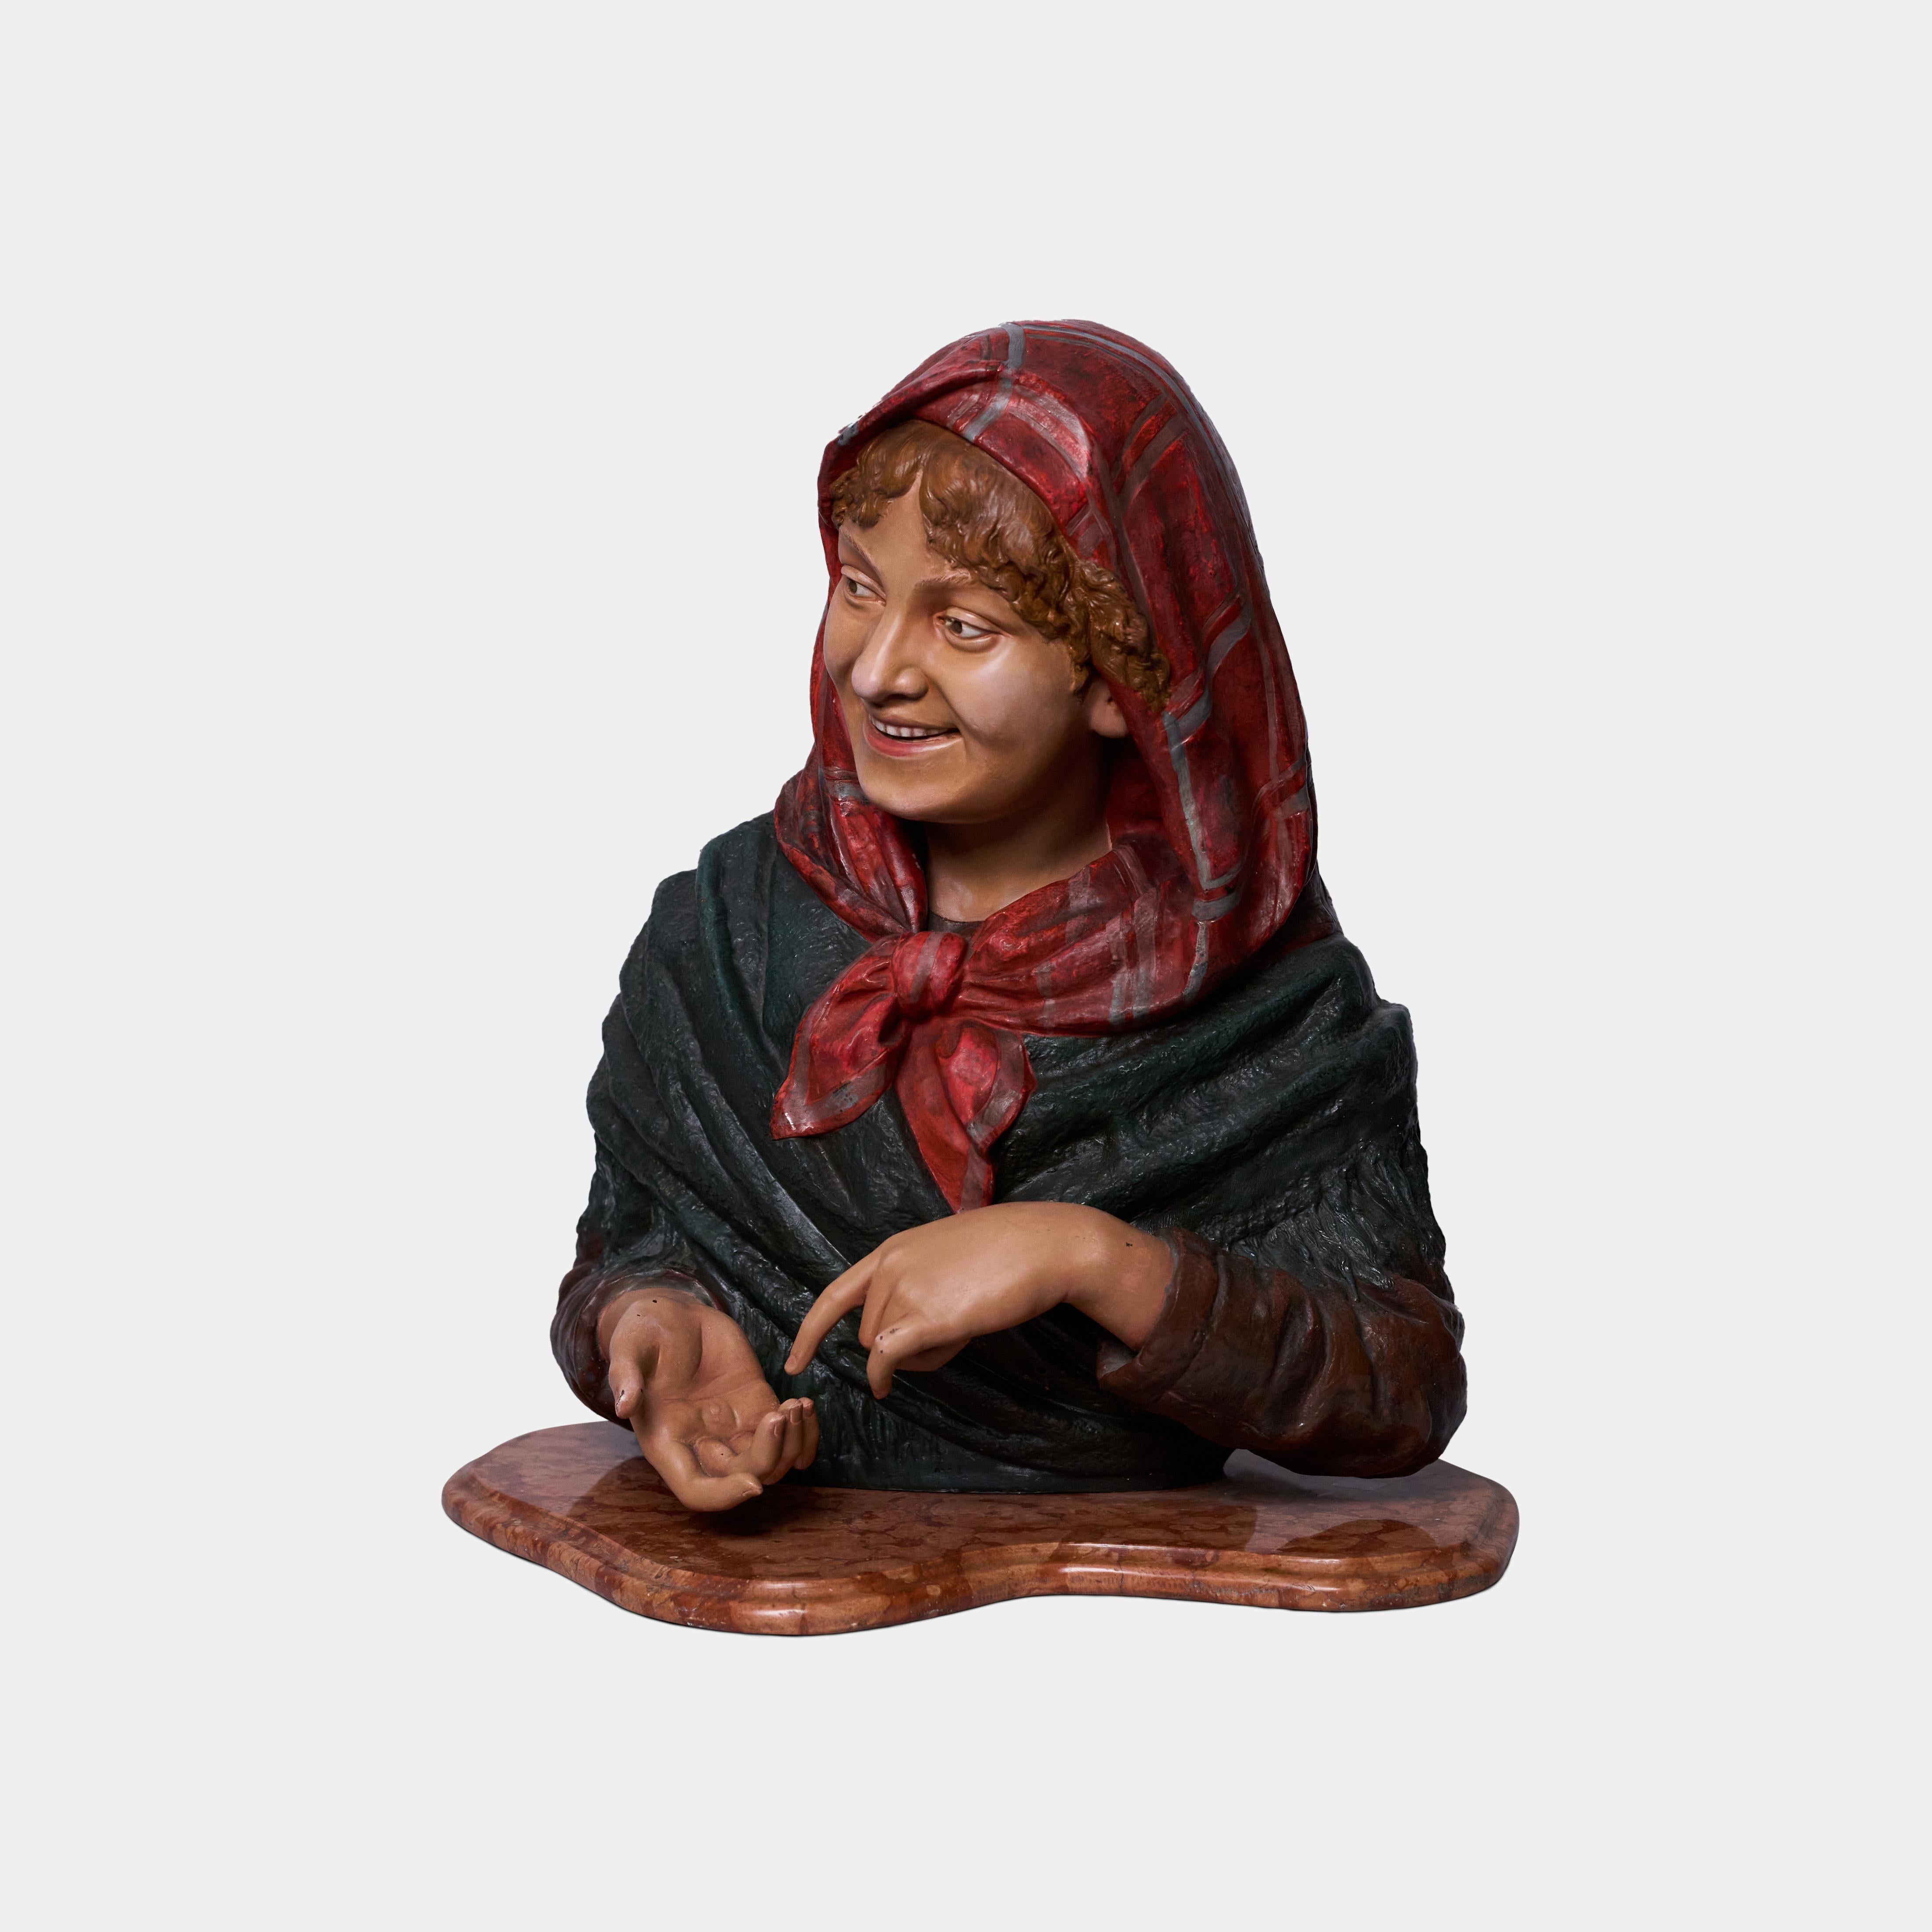 This charming 19th century pair of Polichrome metal figures by Louis Hottot depict a young woman and a young man. Rendered in lifelike detail, these busts seem to show the pair in conversation about a topic which has confused the boy and has